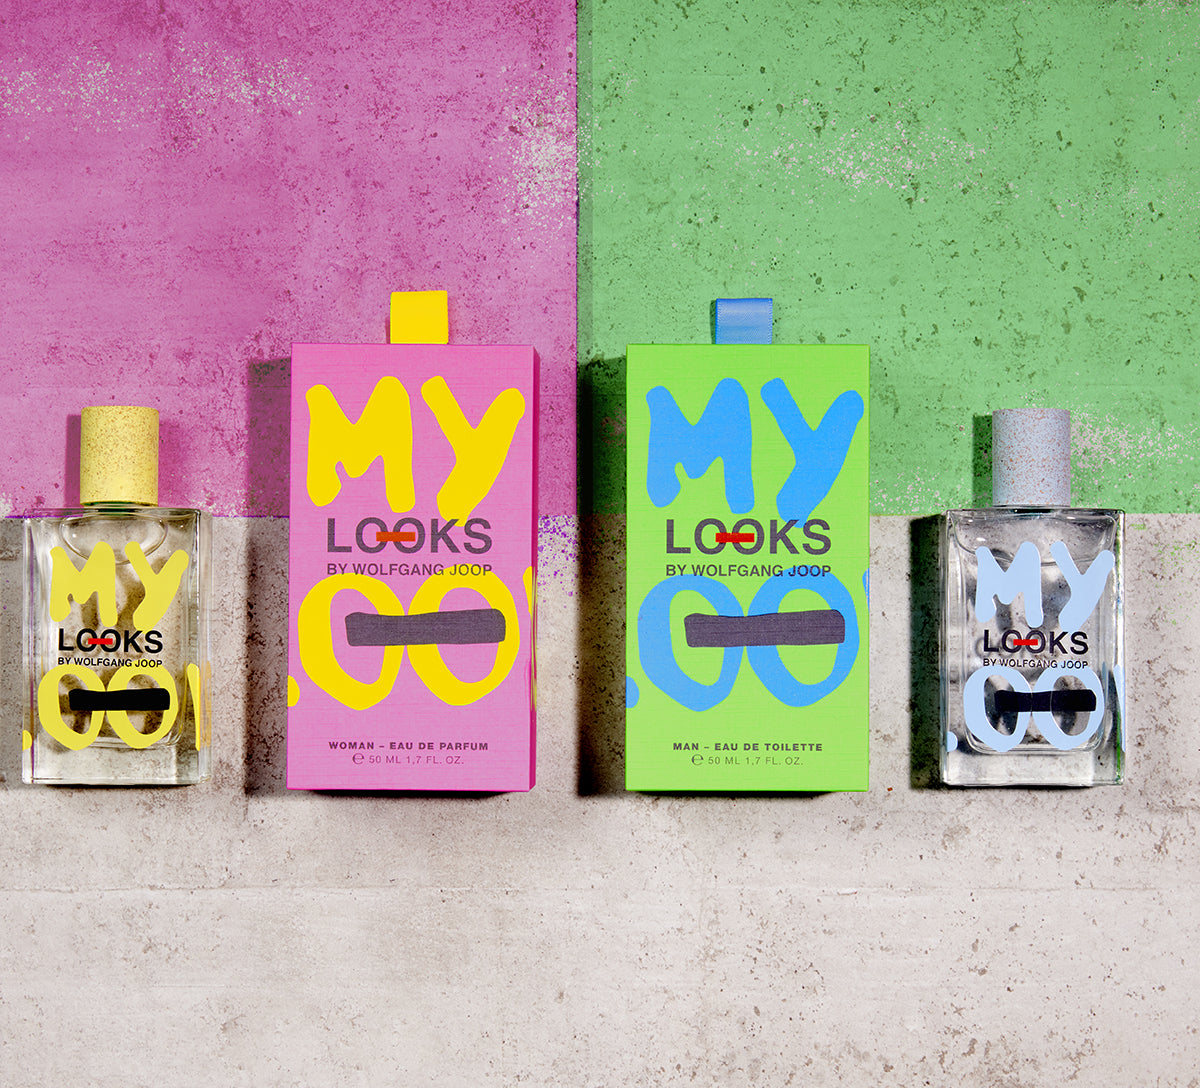 My Looks Man: The New Face of Wolfgang Joop ~ Fragrance Reviews